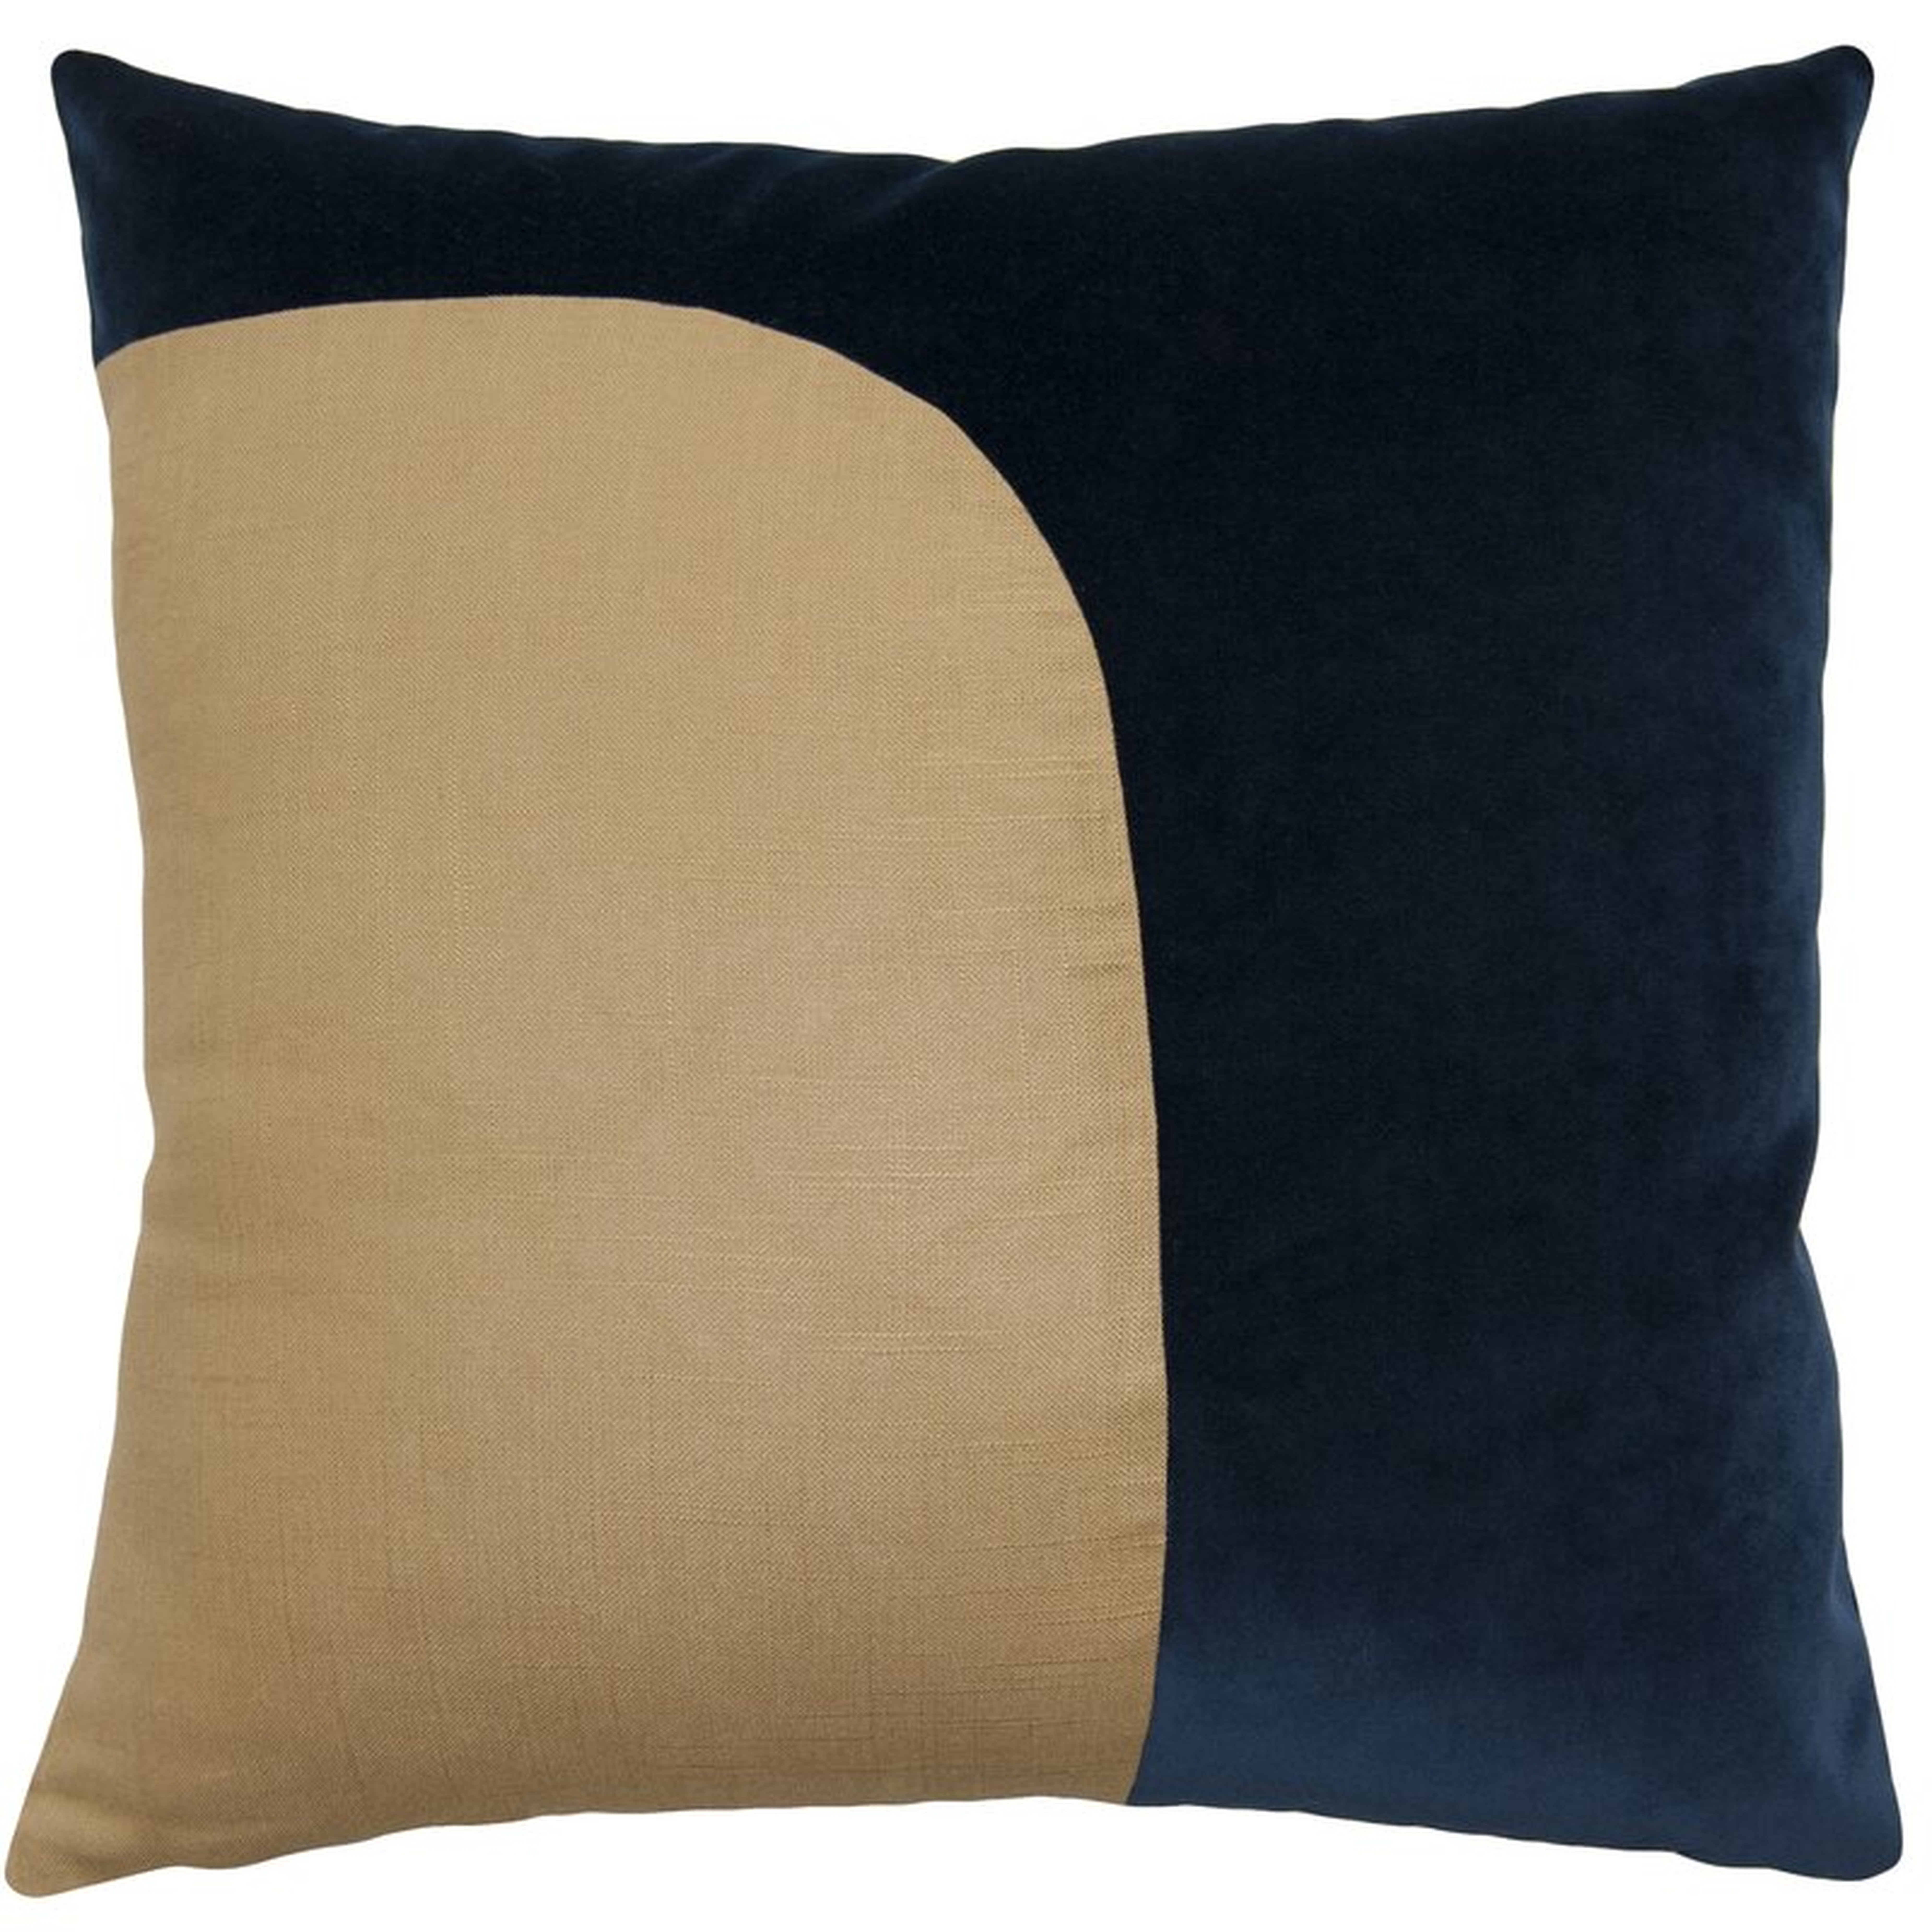 Square Feathers Felix Throw Pillow Cover & Insert - Perigold